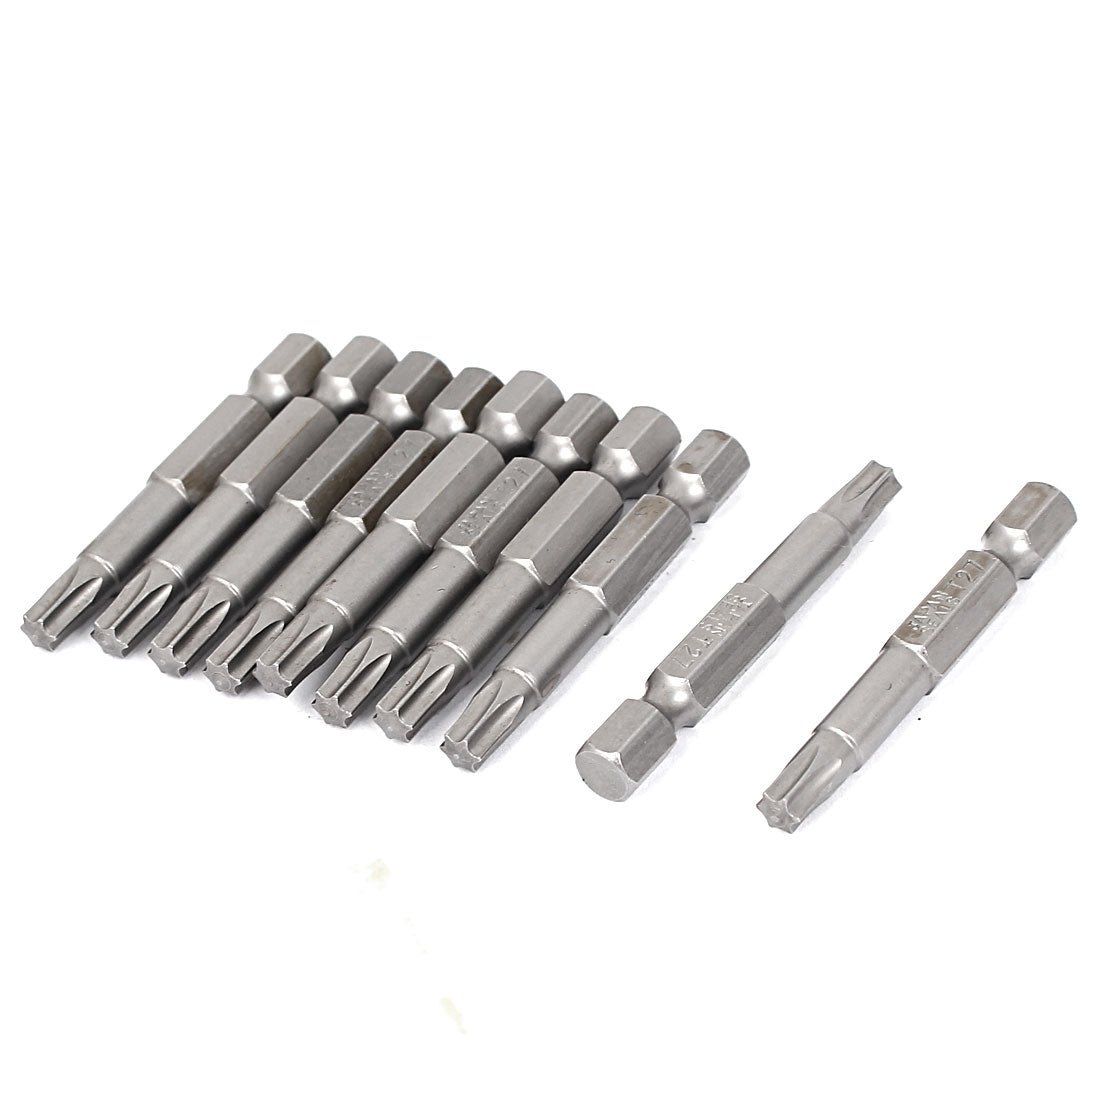 uxcell Uxcell T27 Type 1/4" Hex Shank 50mm Length Magnetic Torx Screwdriver Bits 10pcs